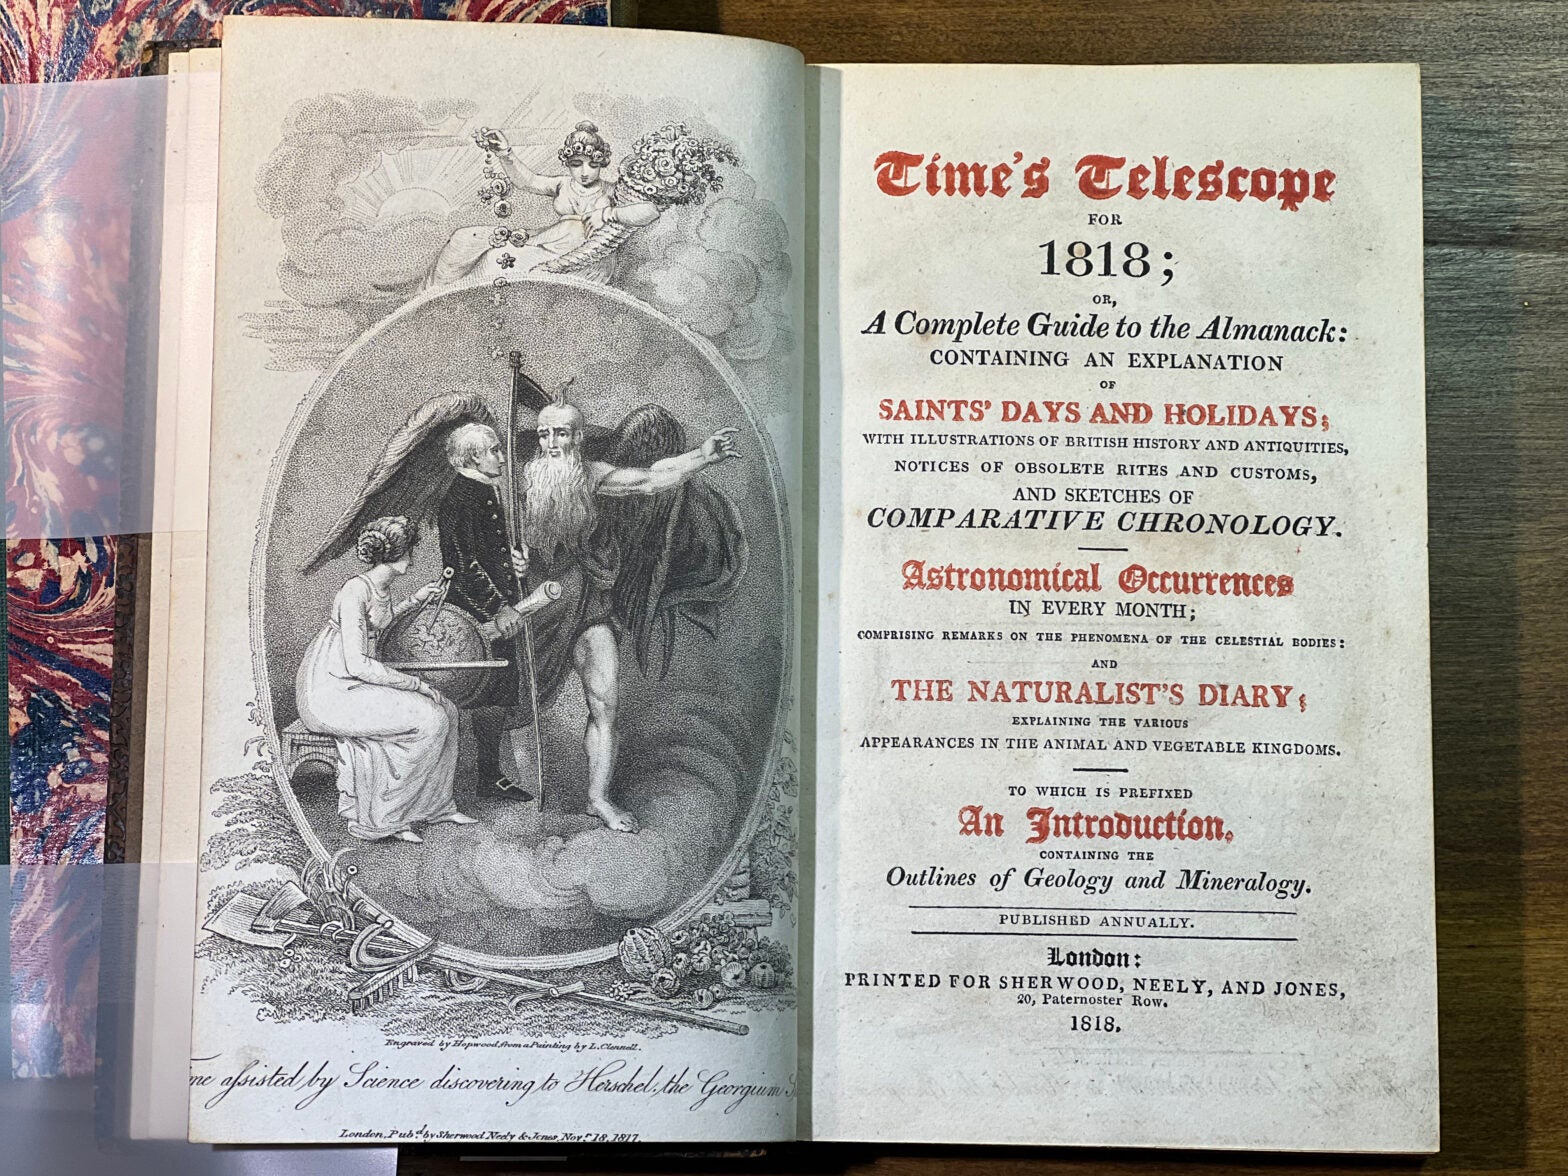 E: Time’s Telescope was an almanac published in London from 1814 to 1834.